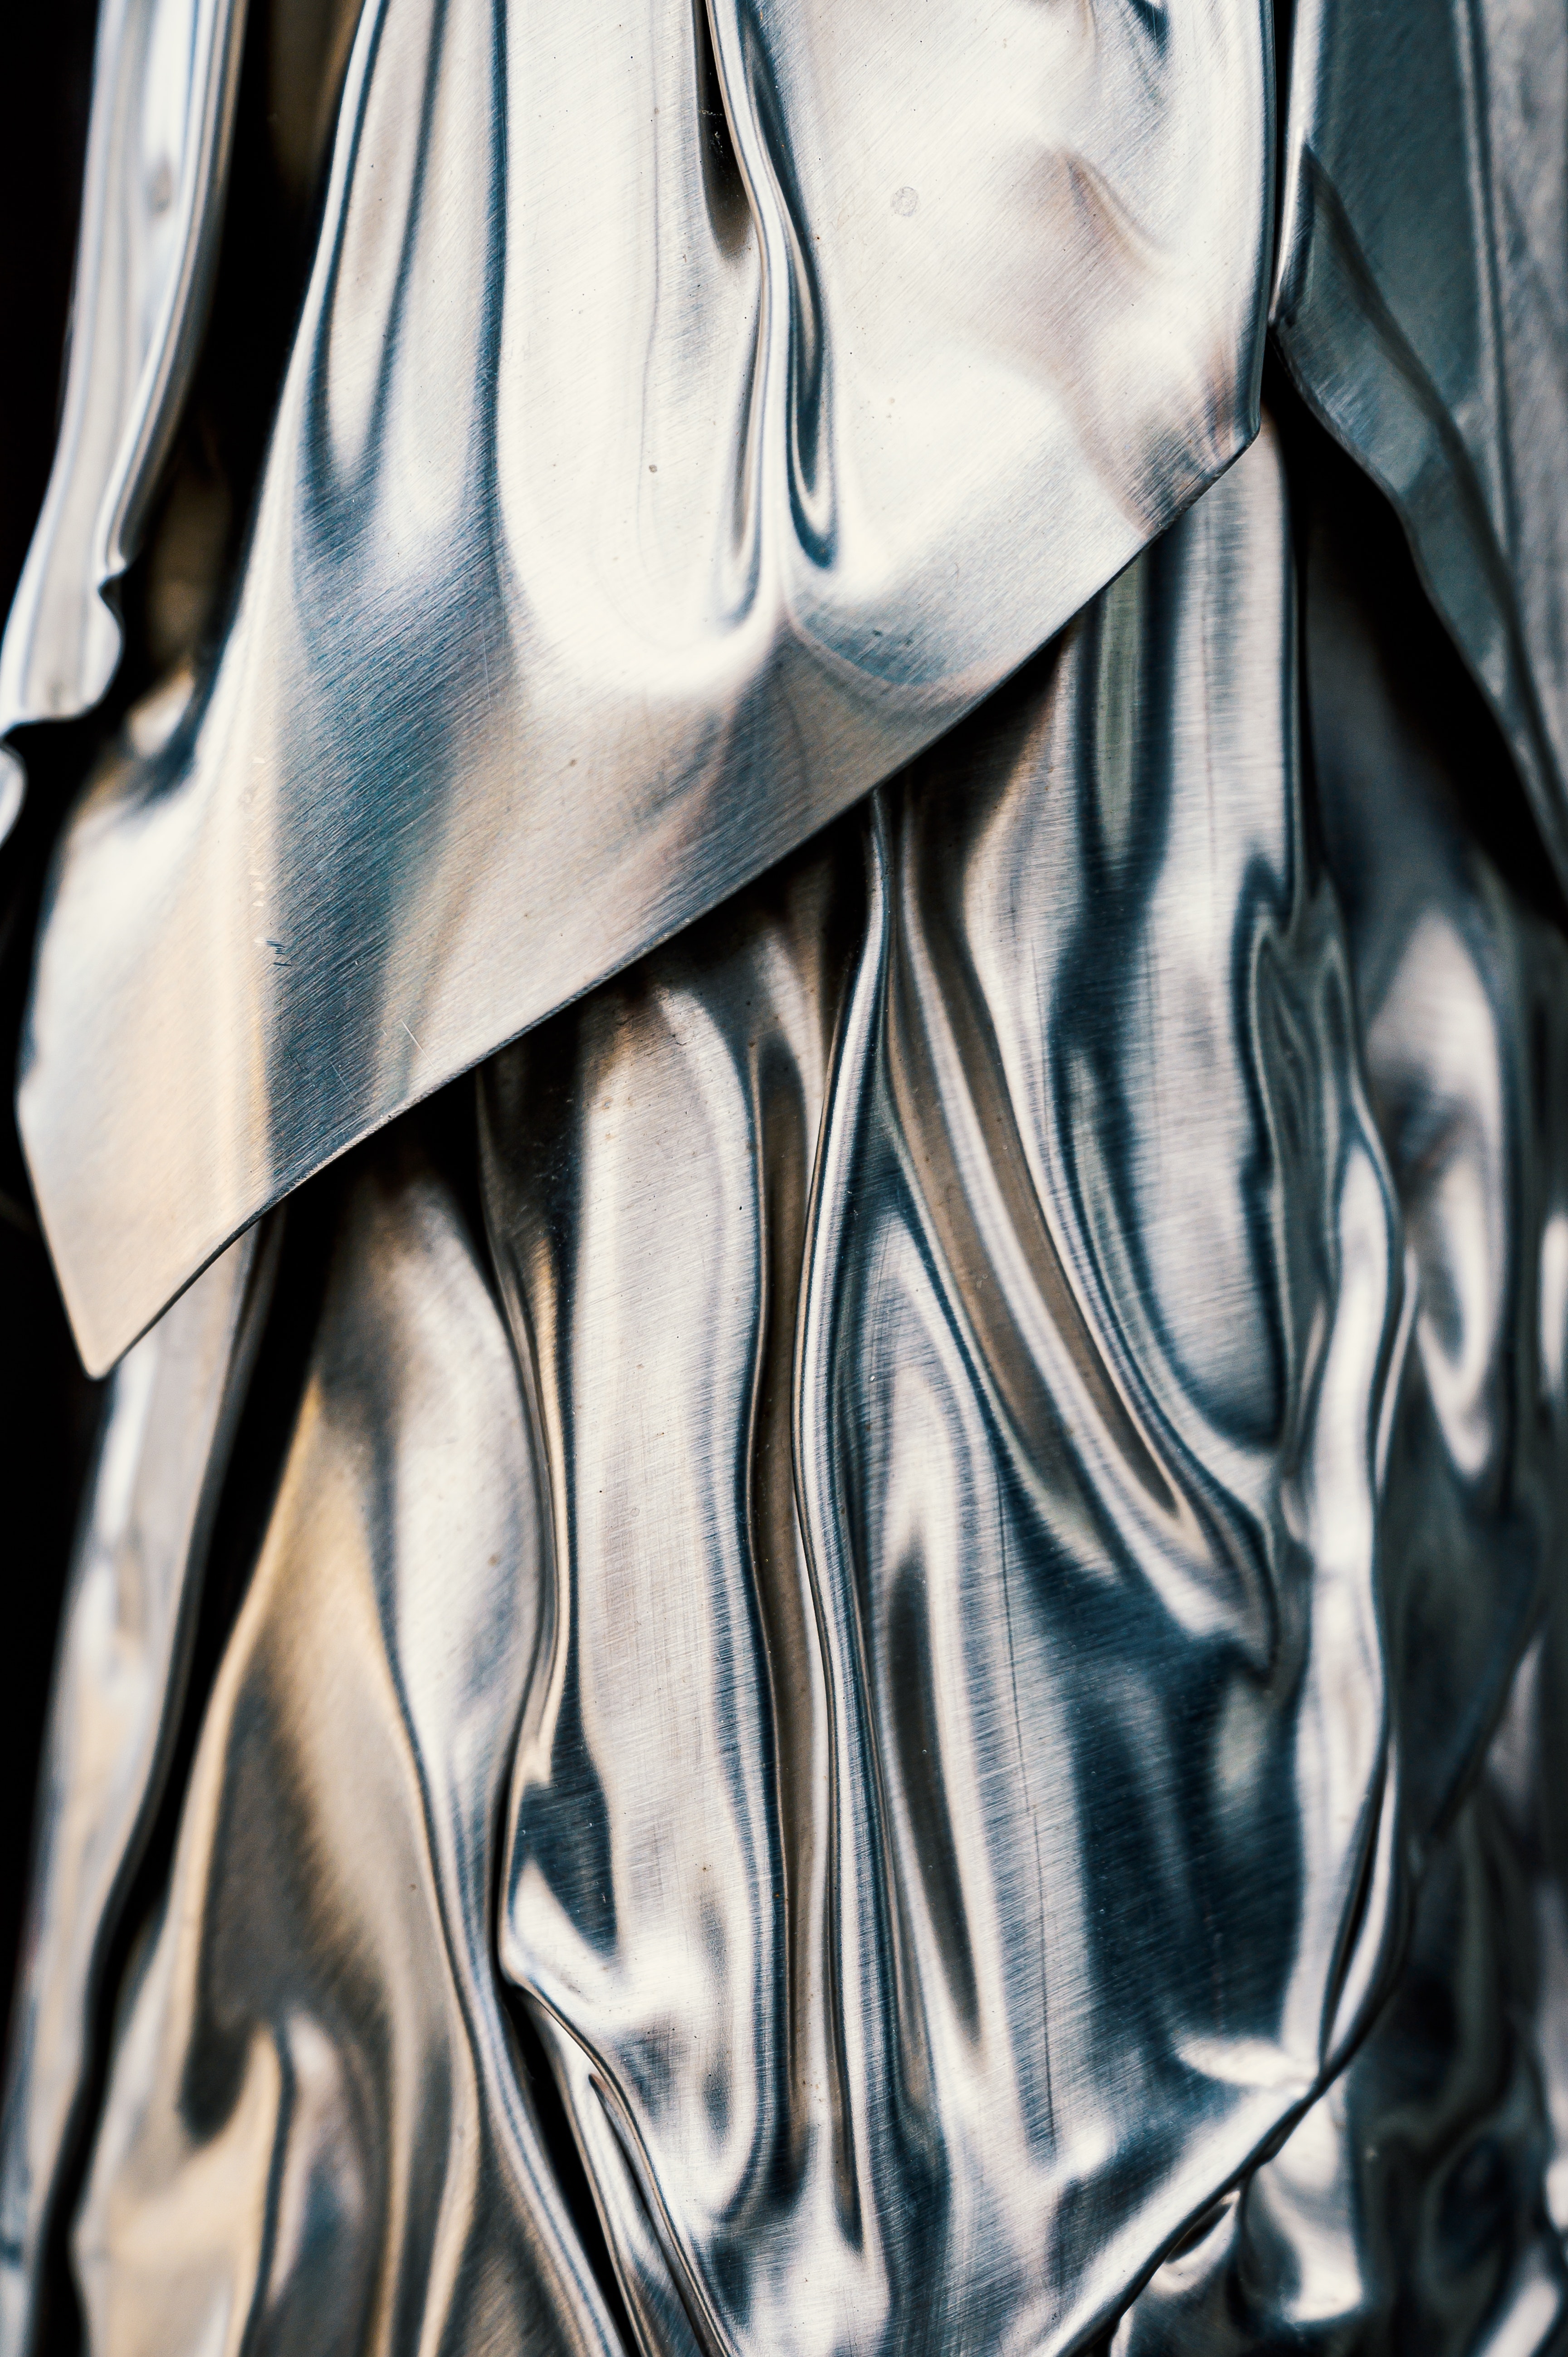 Shiny silver metalic fabric flows luxuriously over itself